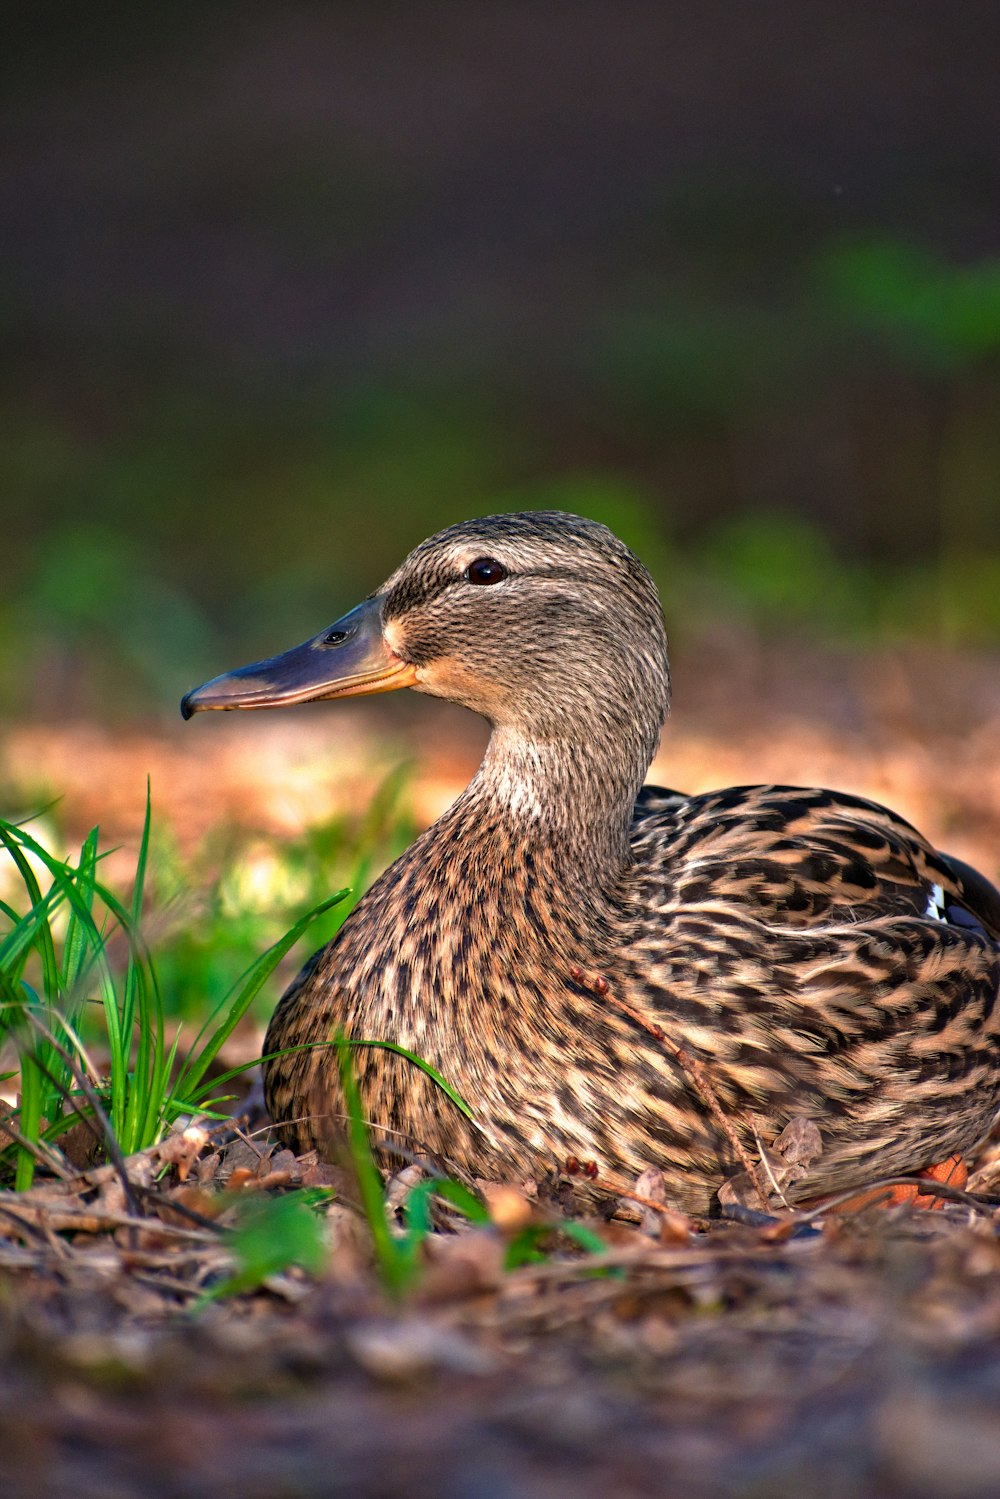 a duck sitting on the ground in the grass